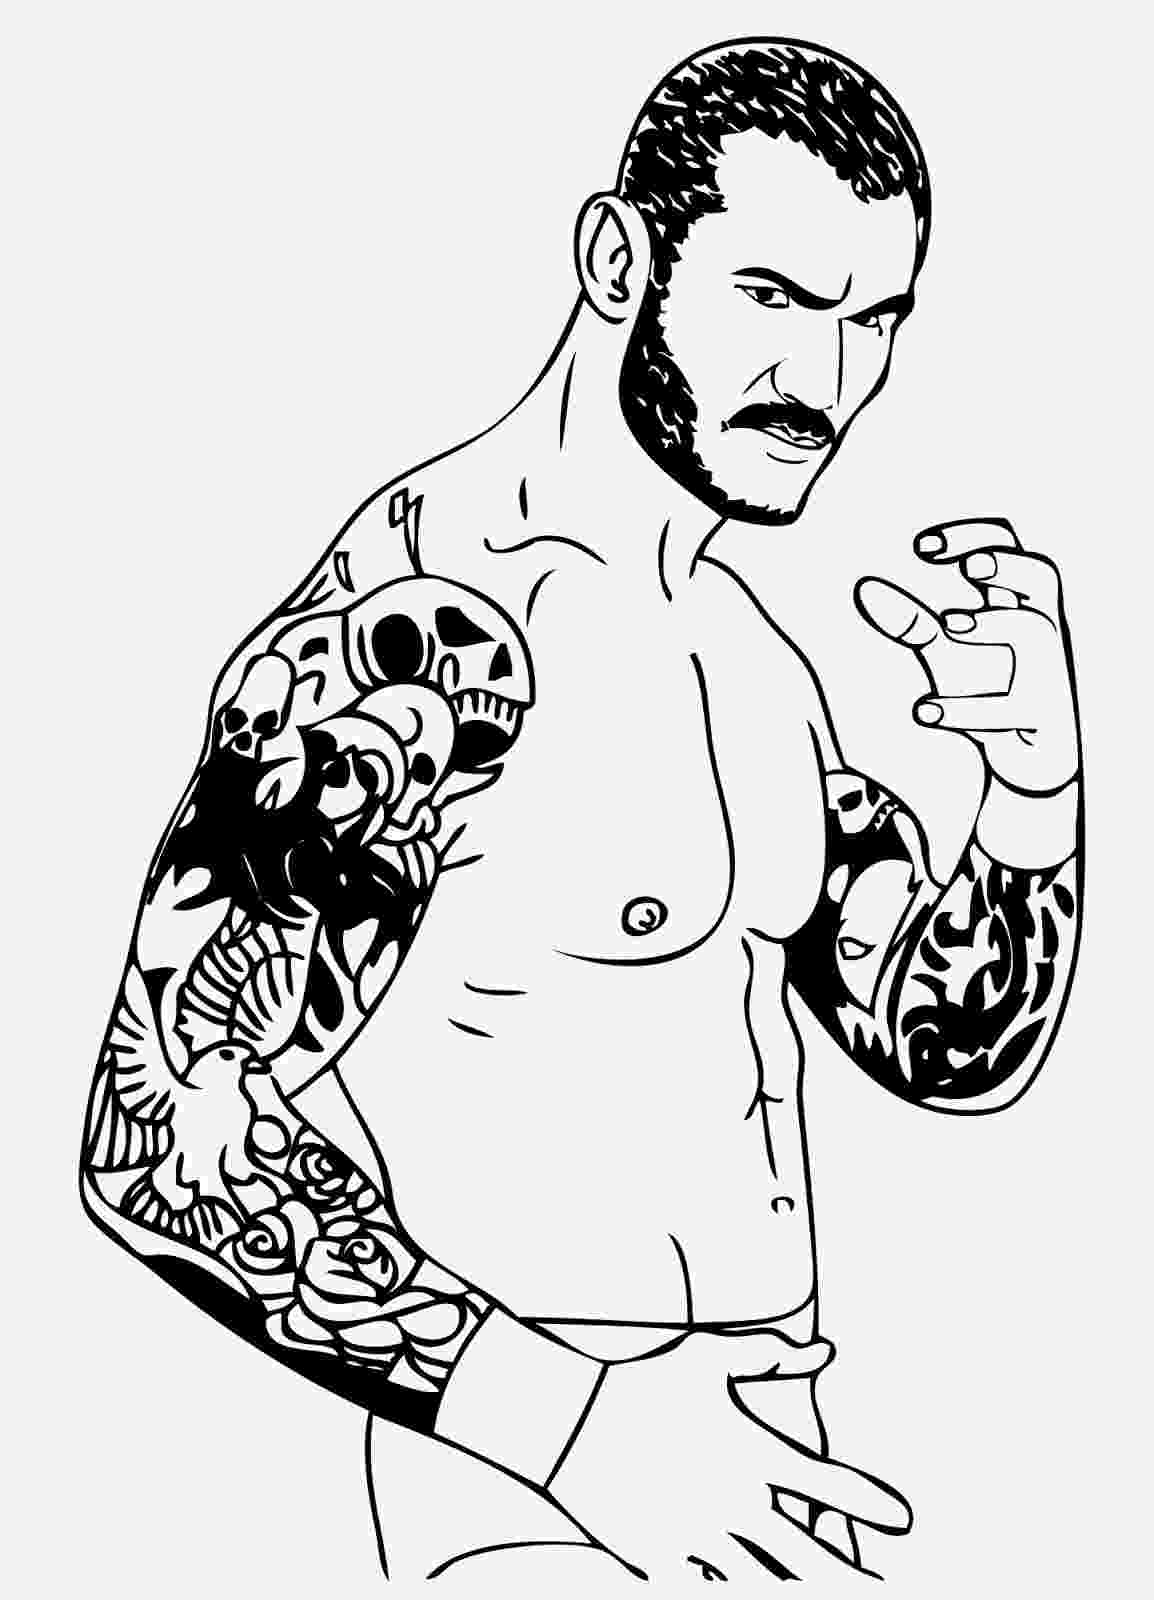 wwe superstars coloring pages 19 best wrestling wwe coloring pages for kids updated 2018 superstars pages coloring wwe 